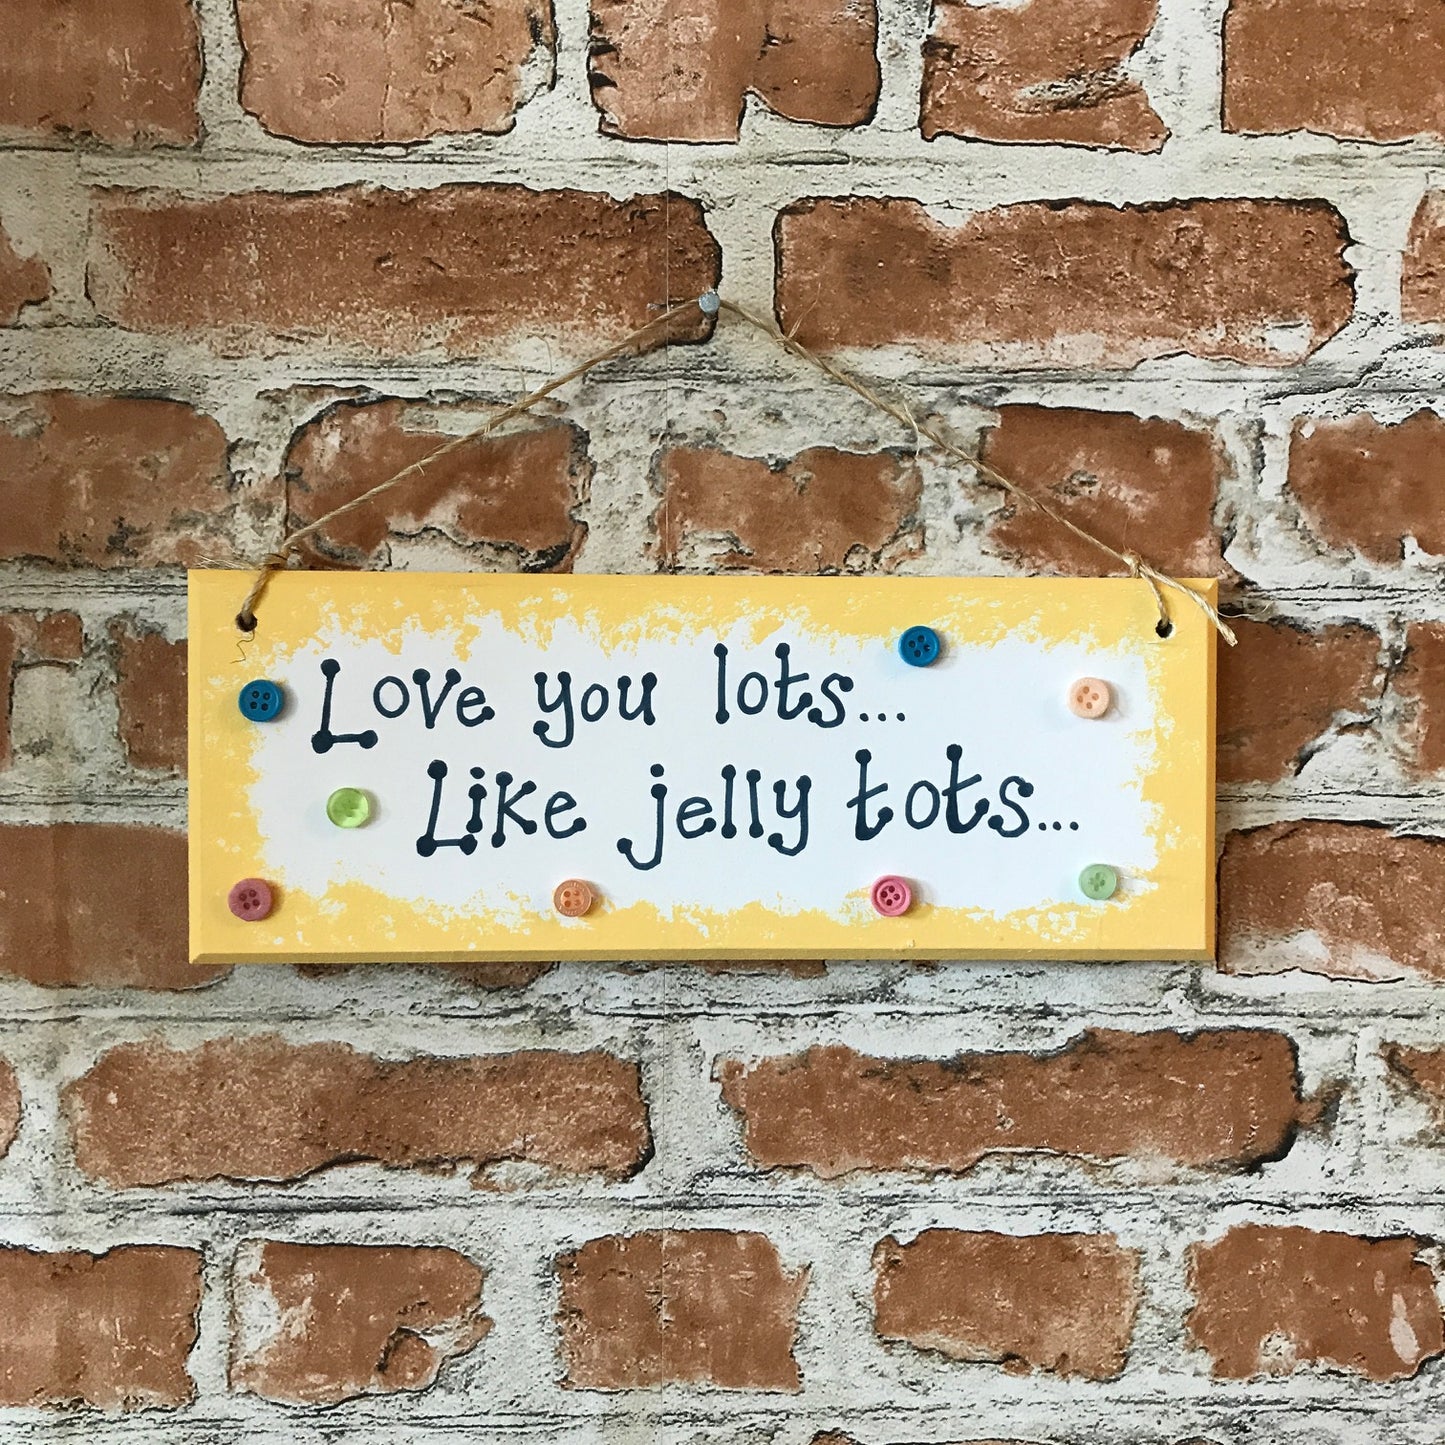 Love you lots like jelly tots - Handmade Wooden Plaque from The Wrong End of Town